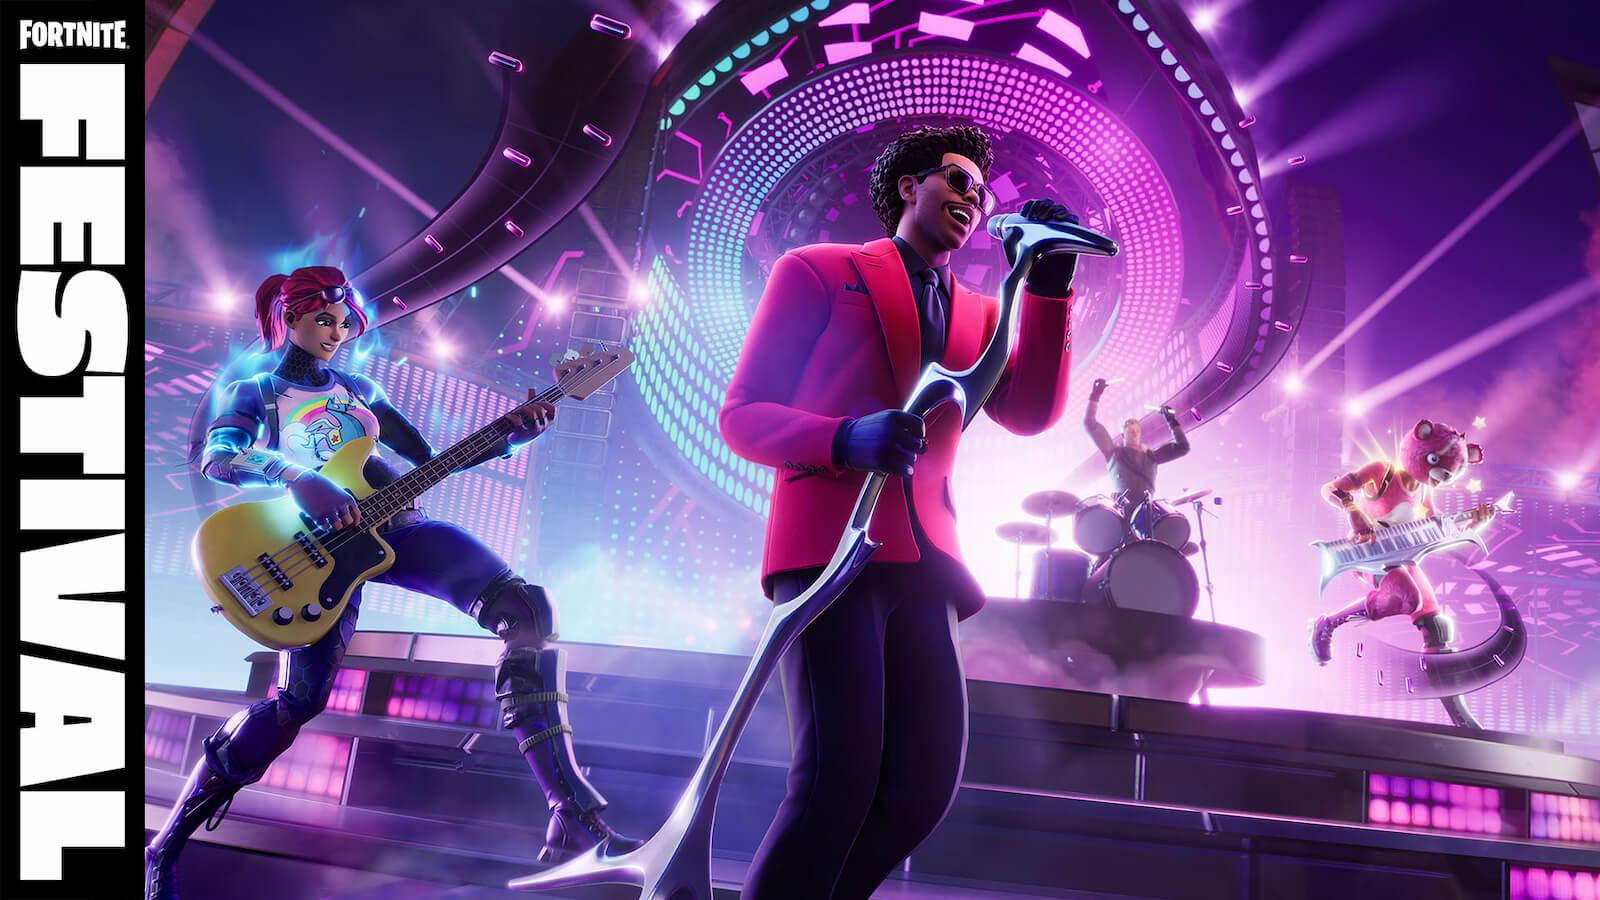 Fortnite Festival mode: The Weeknd event, release date & more